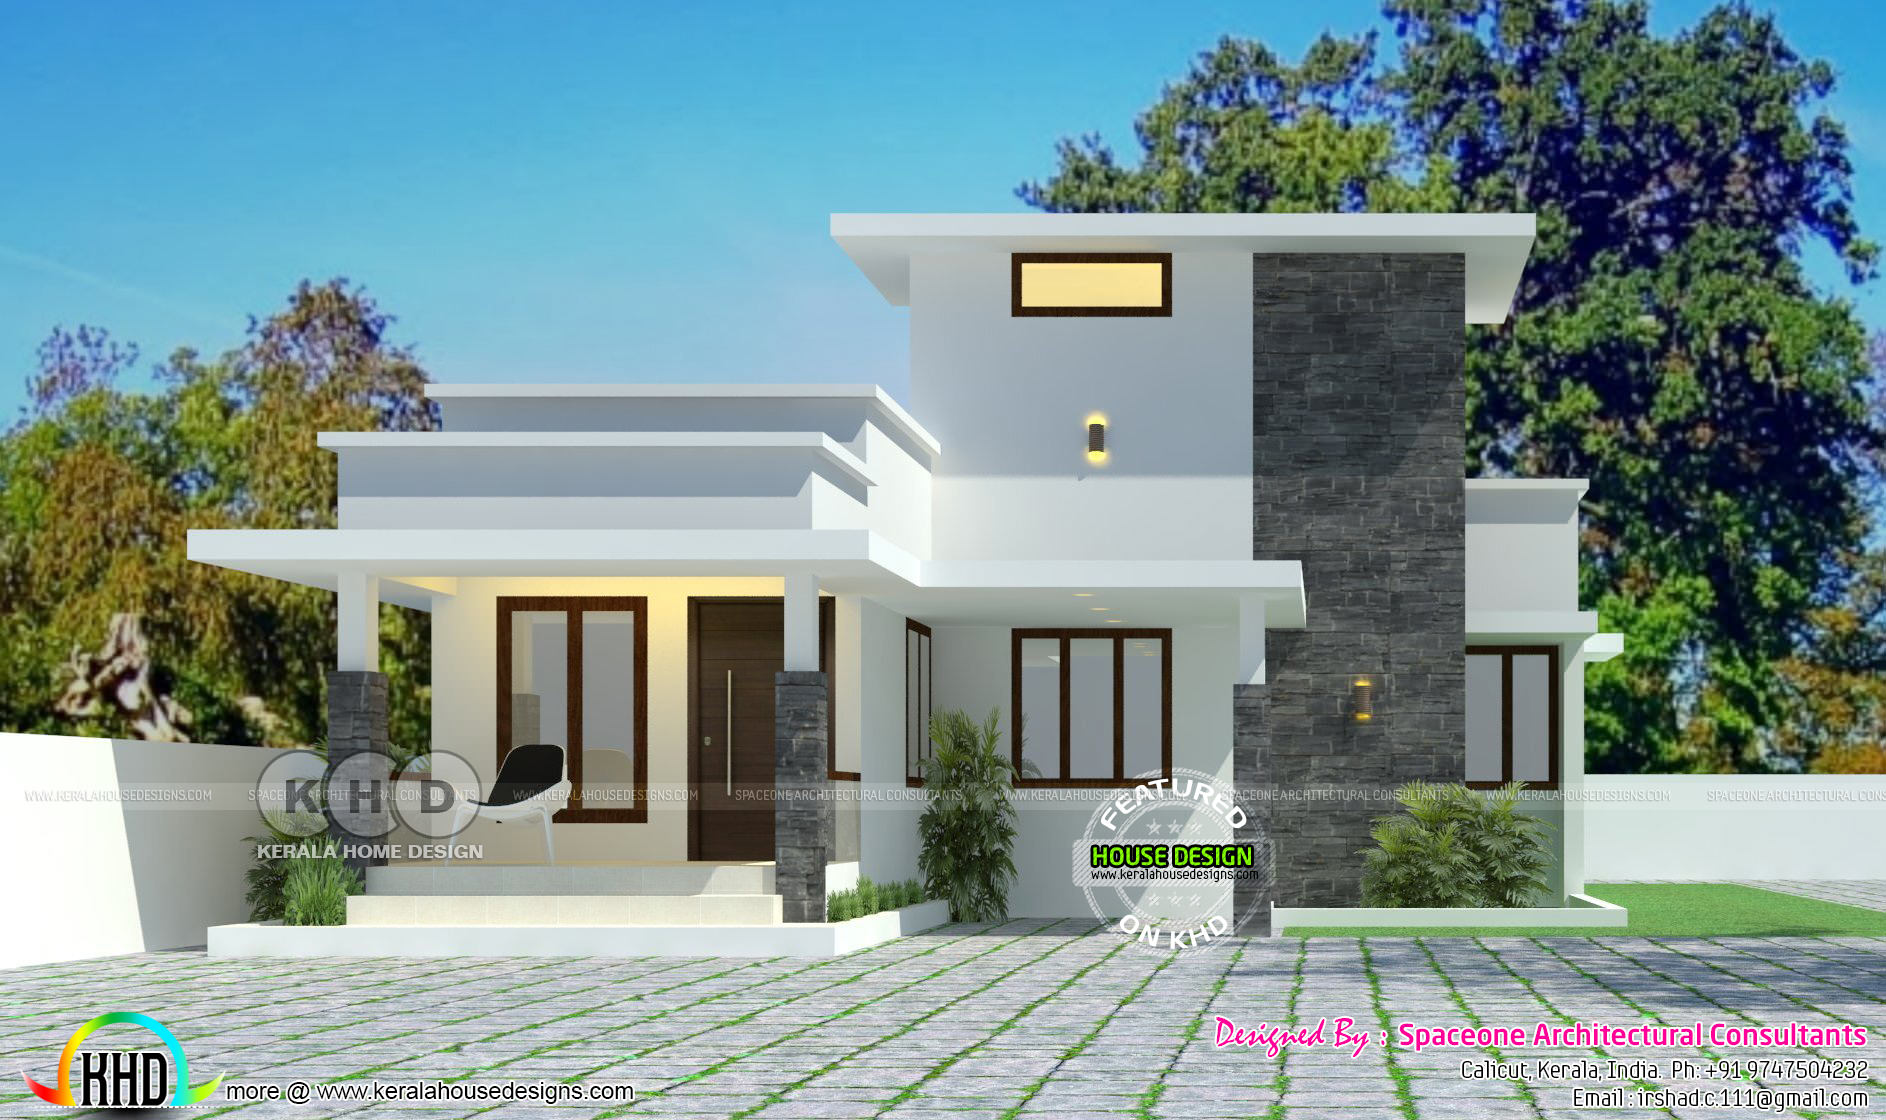 Single storied low cost Kerala home design